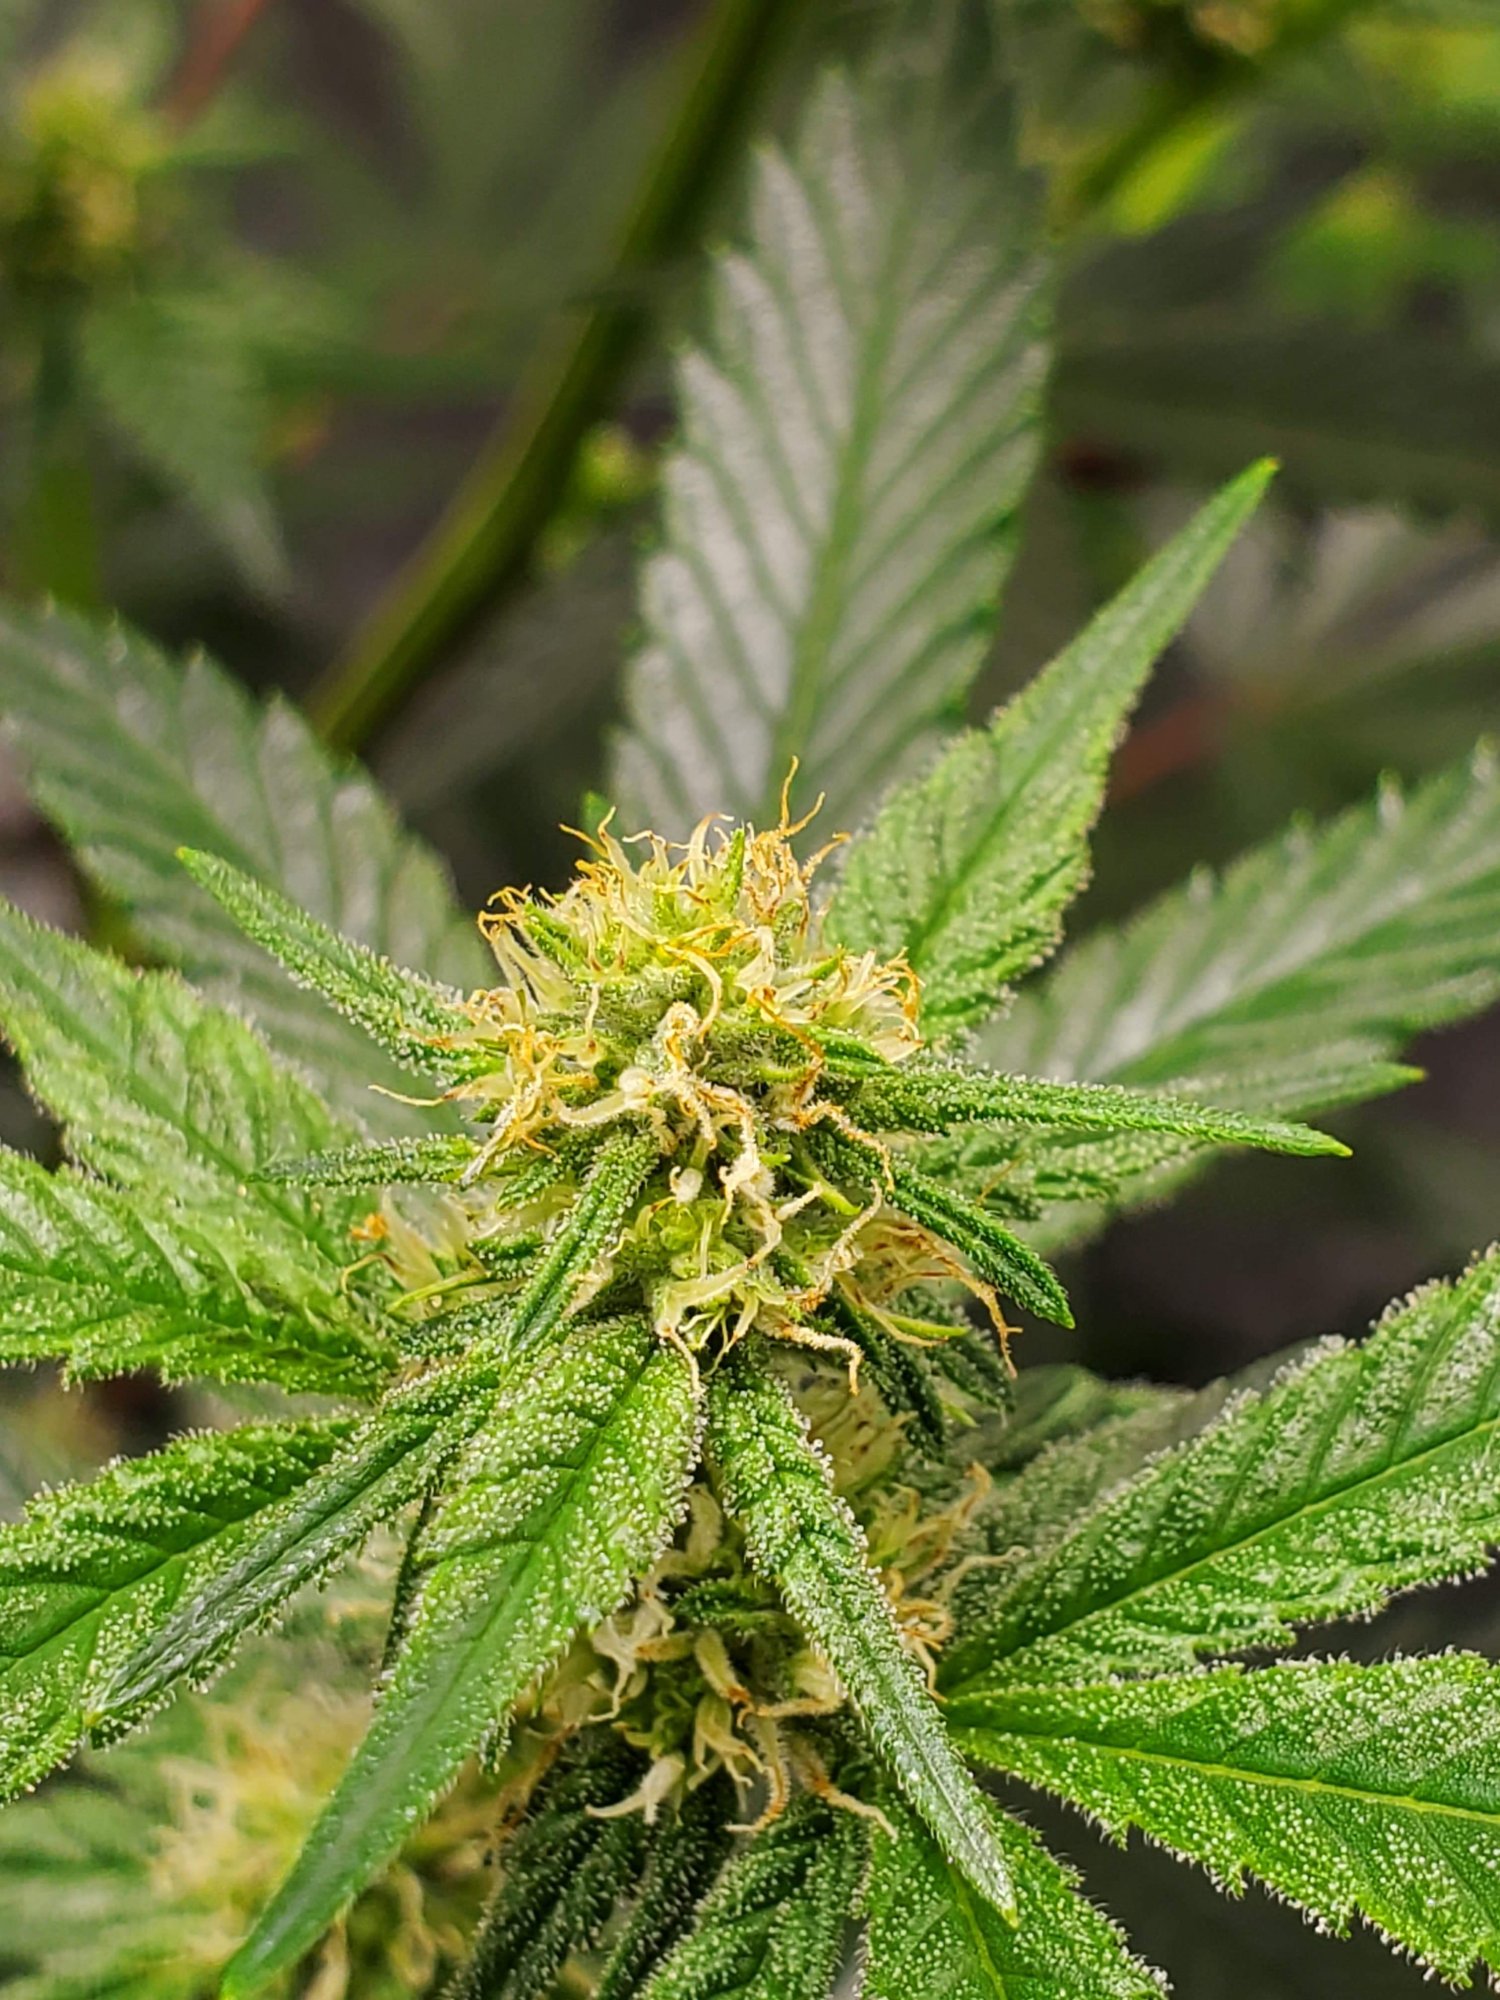 Thrips to black spots to leaf tips curling up in week 4 flower 14